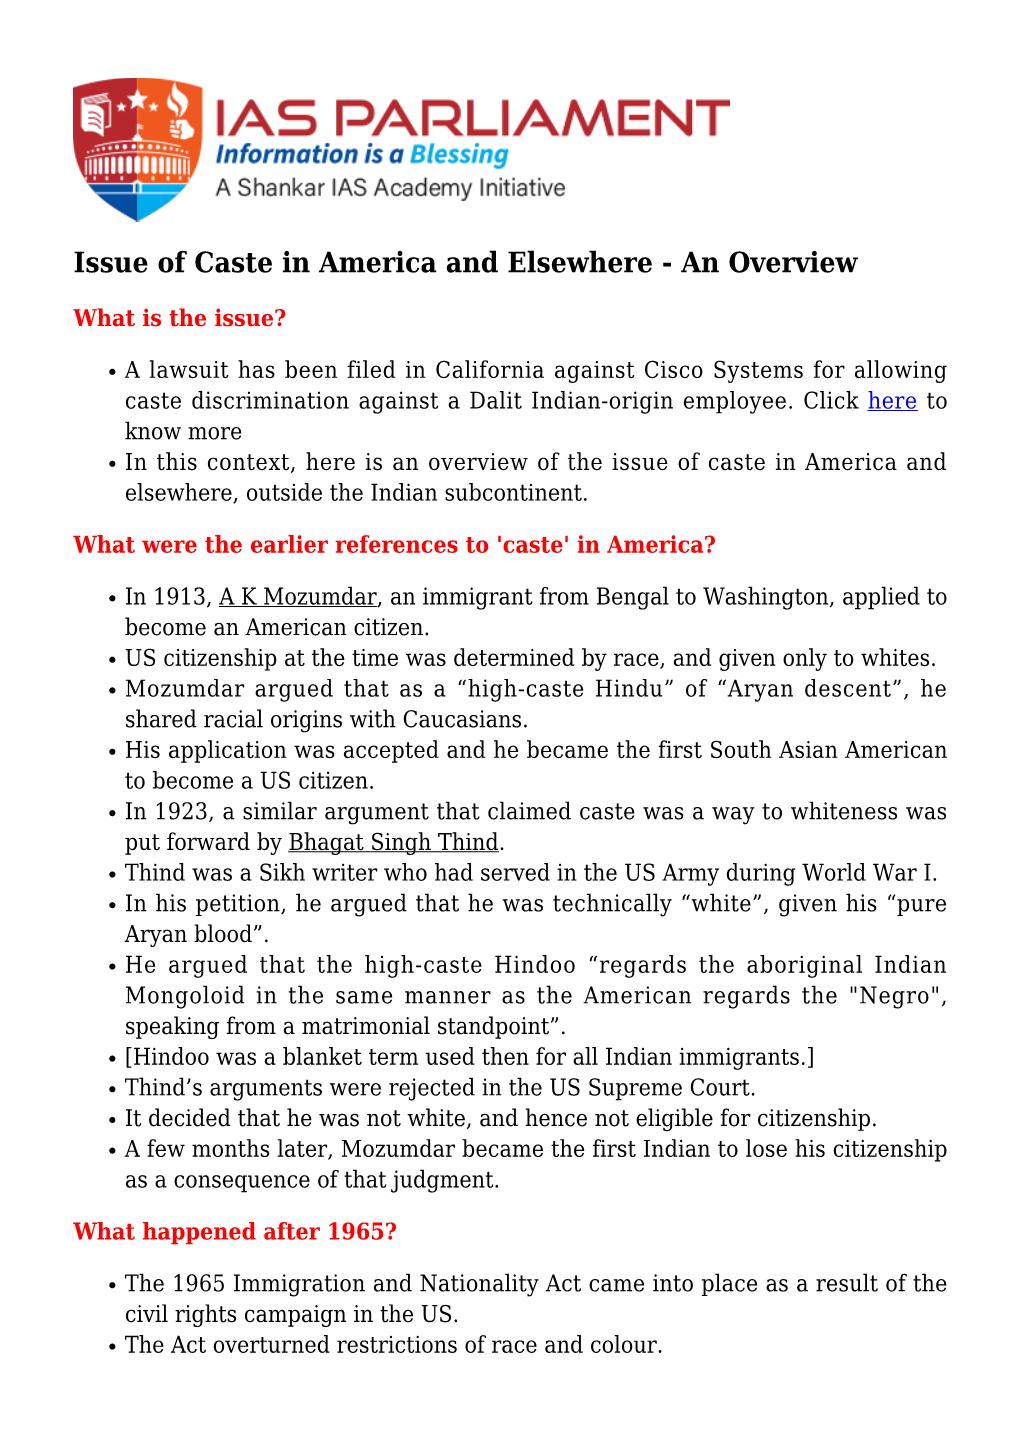 Issue of Caste in America and Elsewhere - an Overview